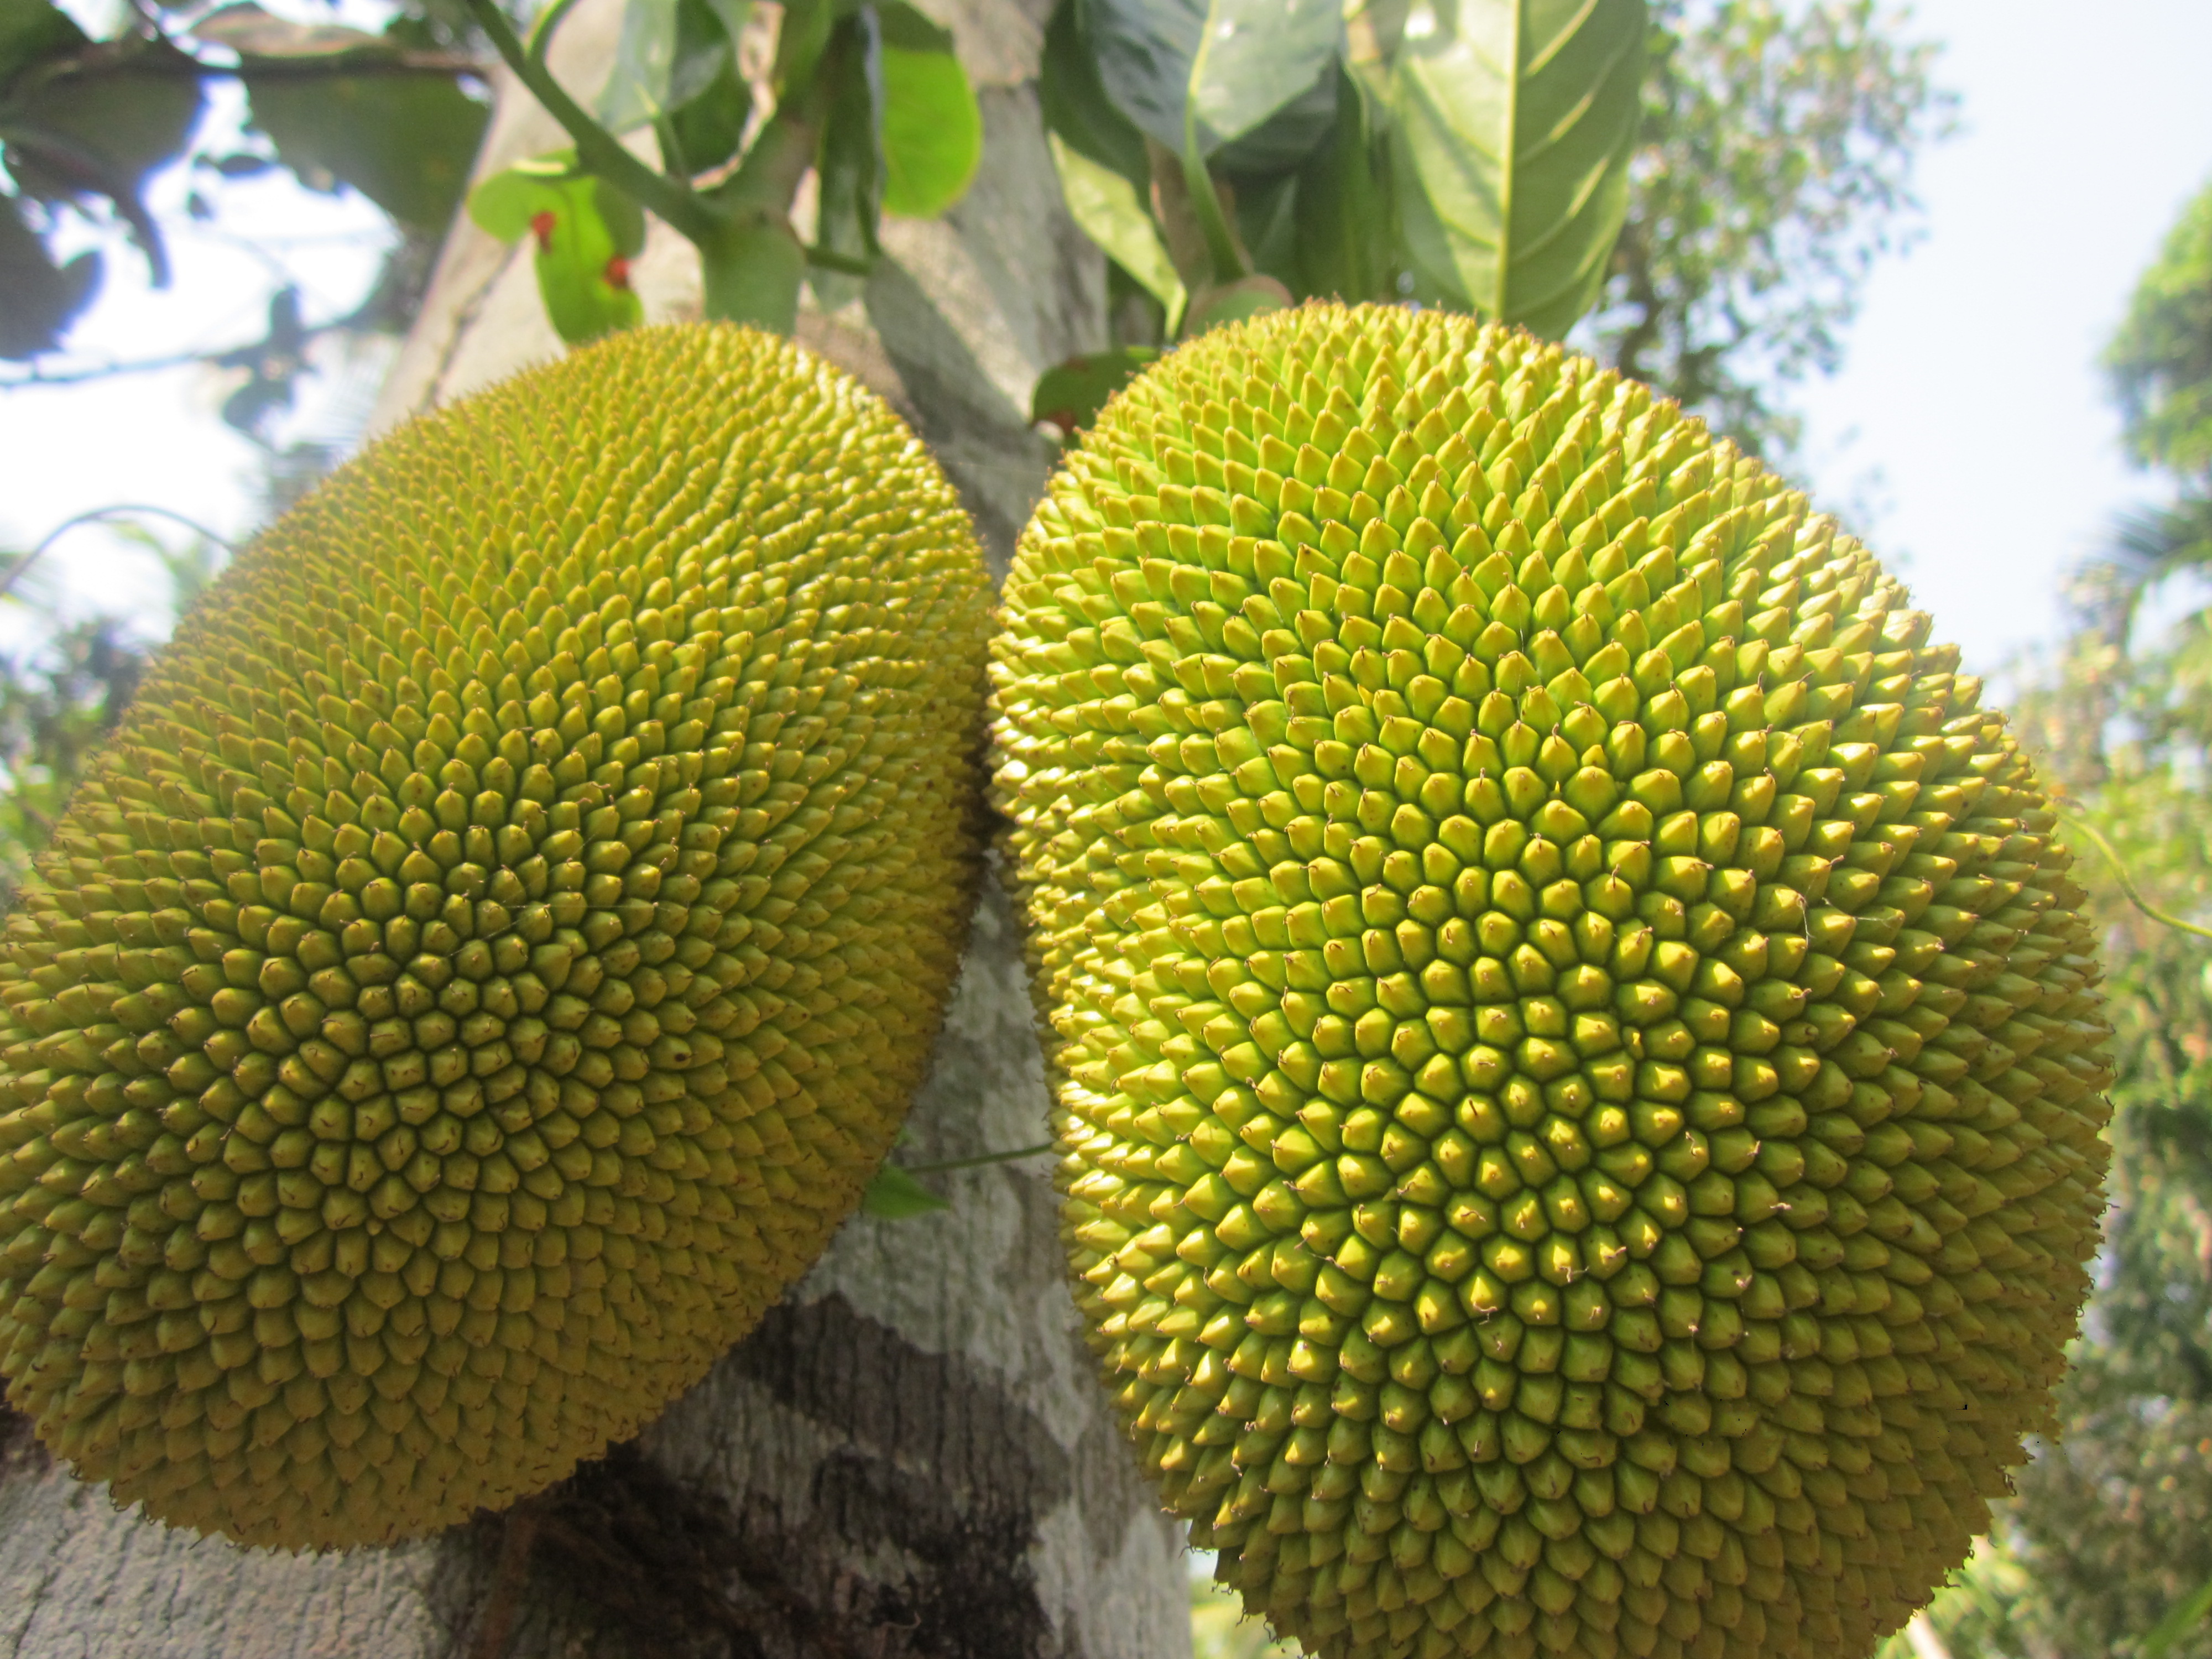 Jackfruit comes in tins in most supermarkets